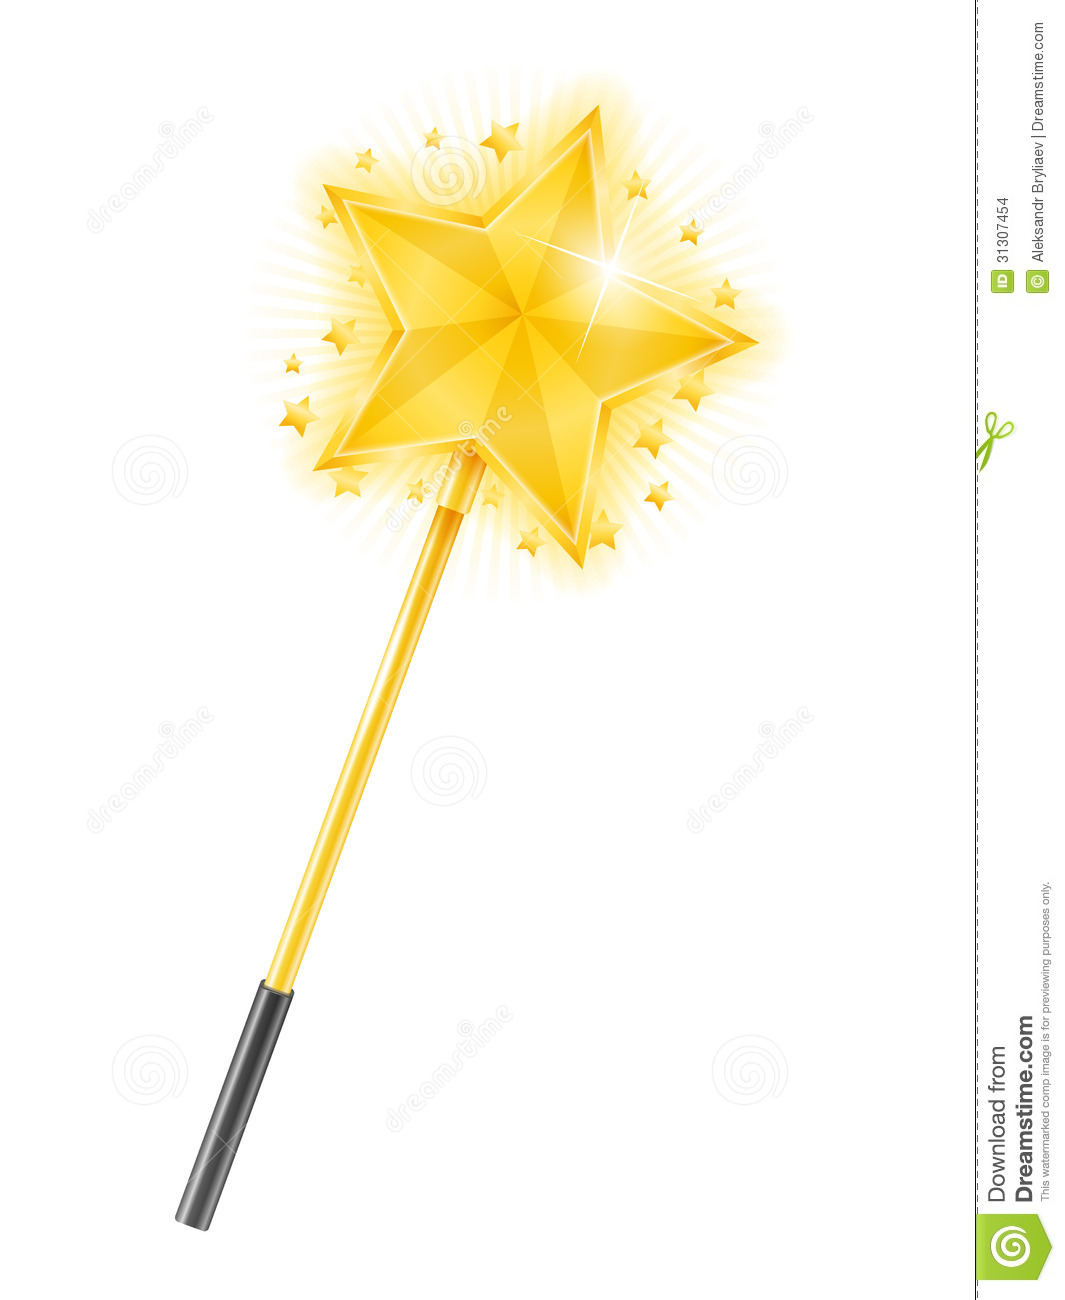 Magic Wand With Golden Star On White Background 